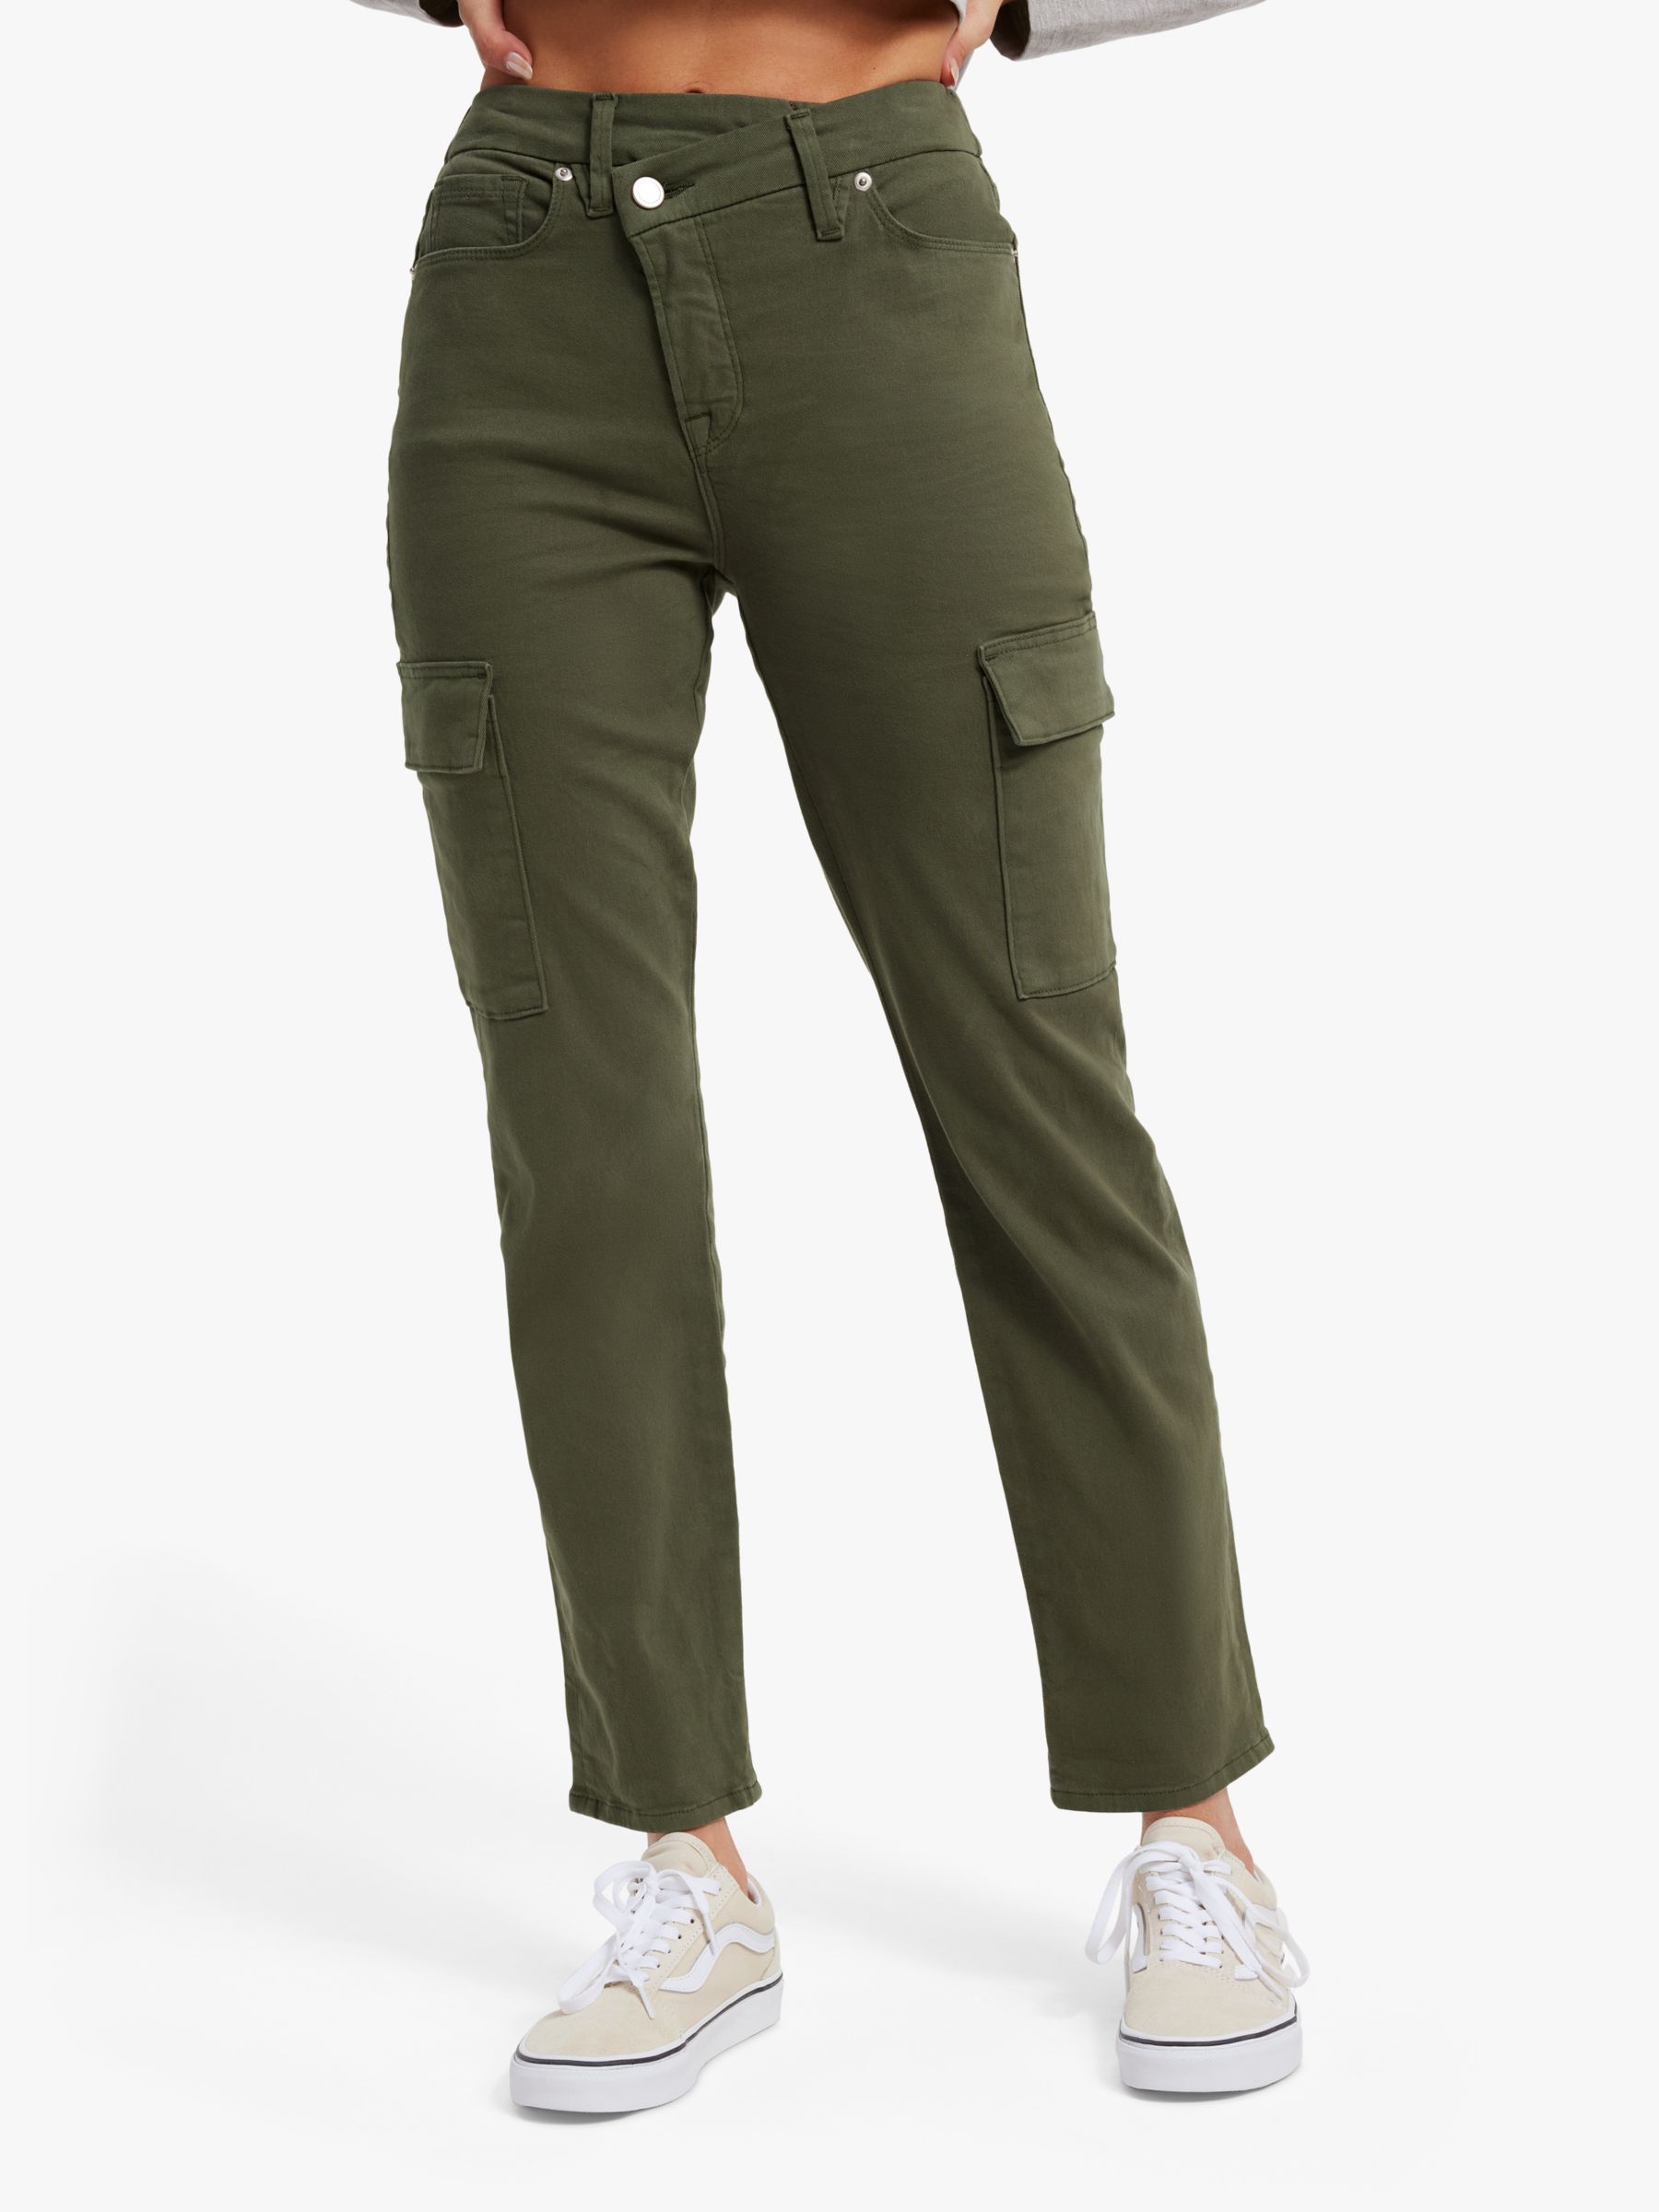 Good American Cuffed Army Style Trousers, Green at John Lewis & Partners